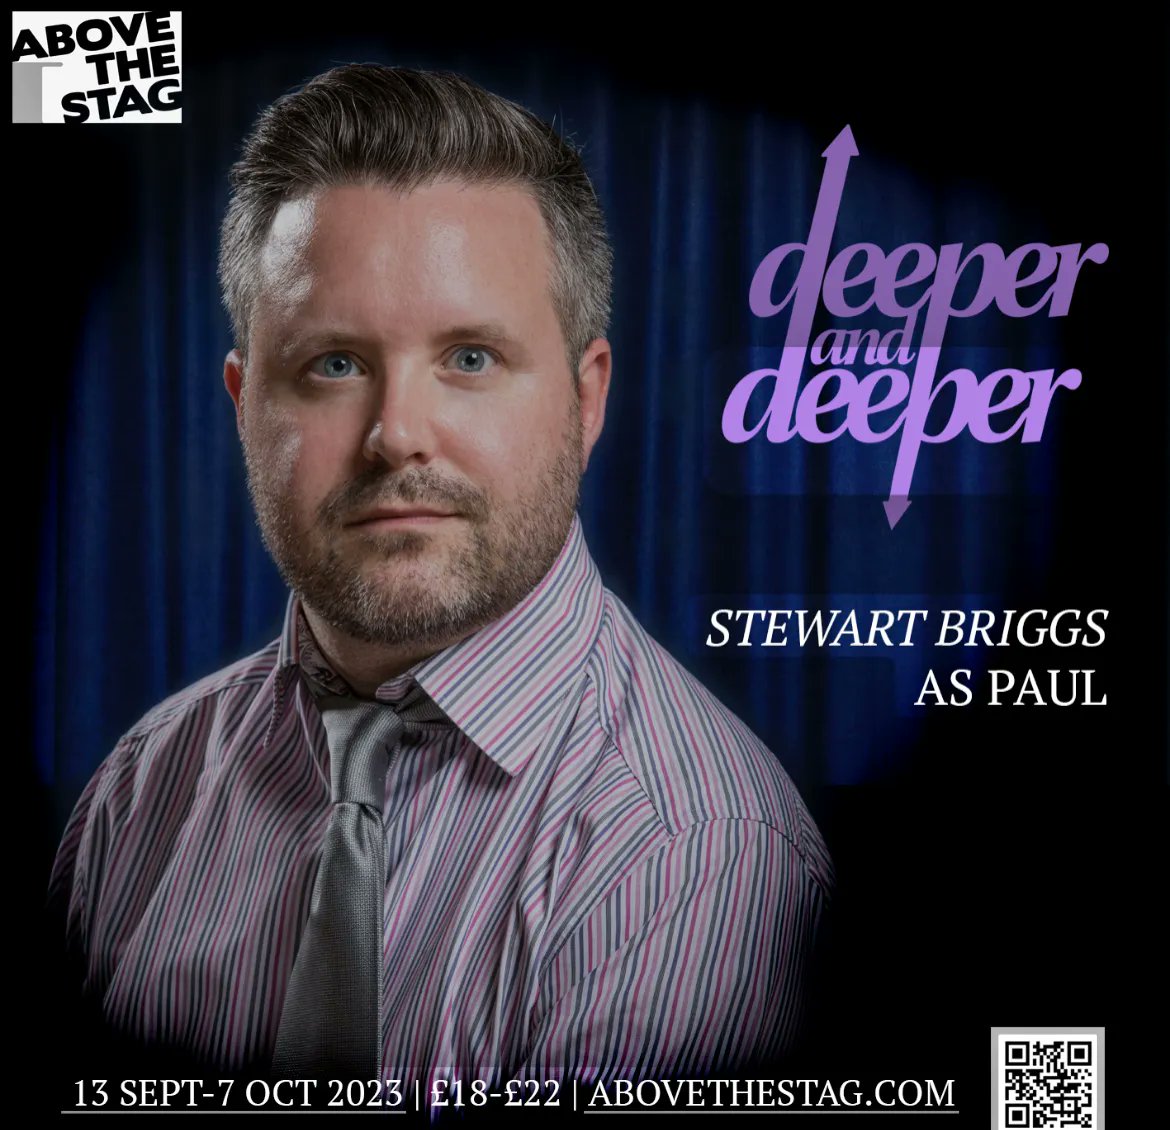 Returning to the role of Paul in Deeper and Deeper is Stewart Briggs. Book now! Some performances now sold out! Abovethestag.com